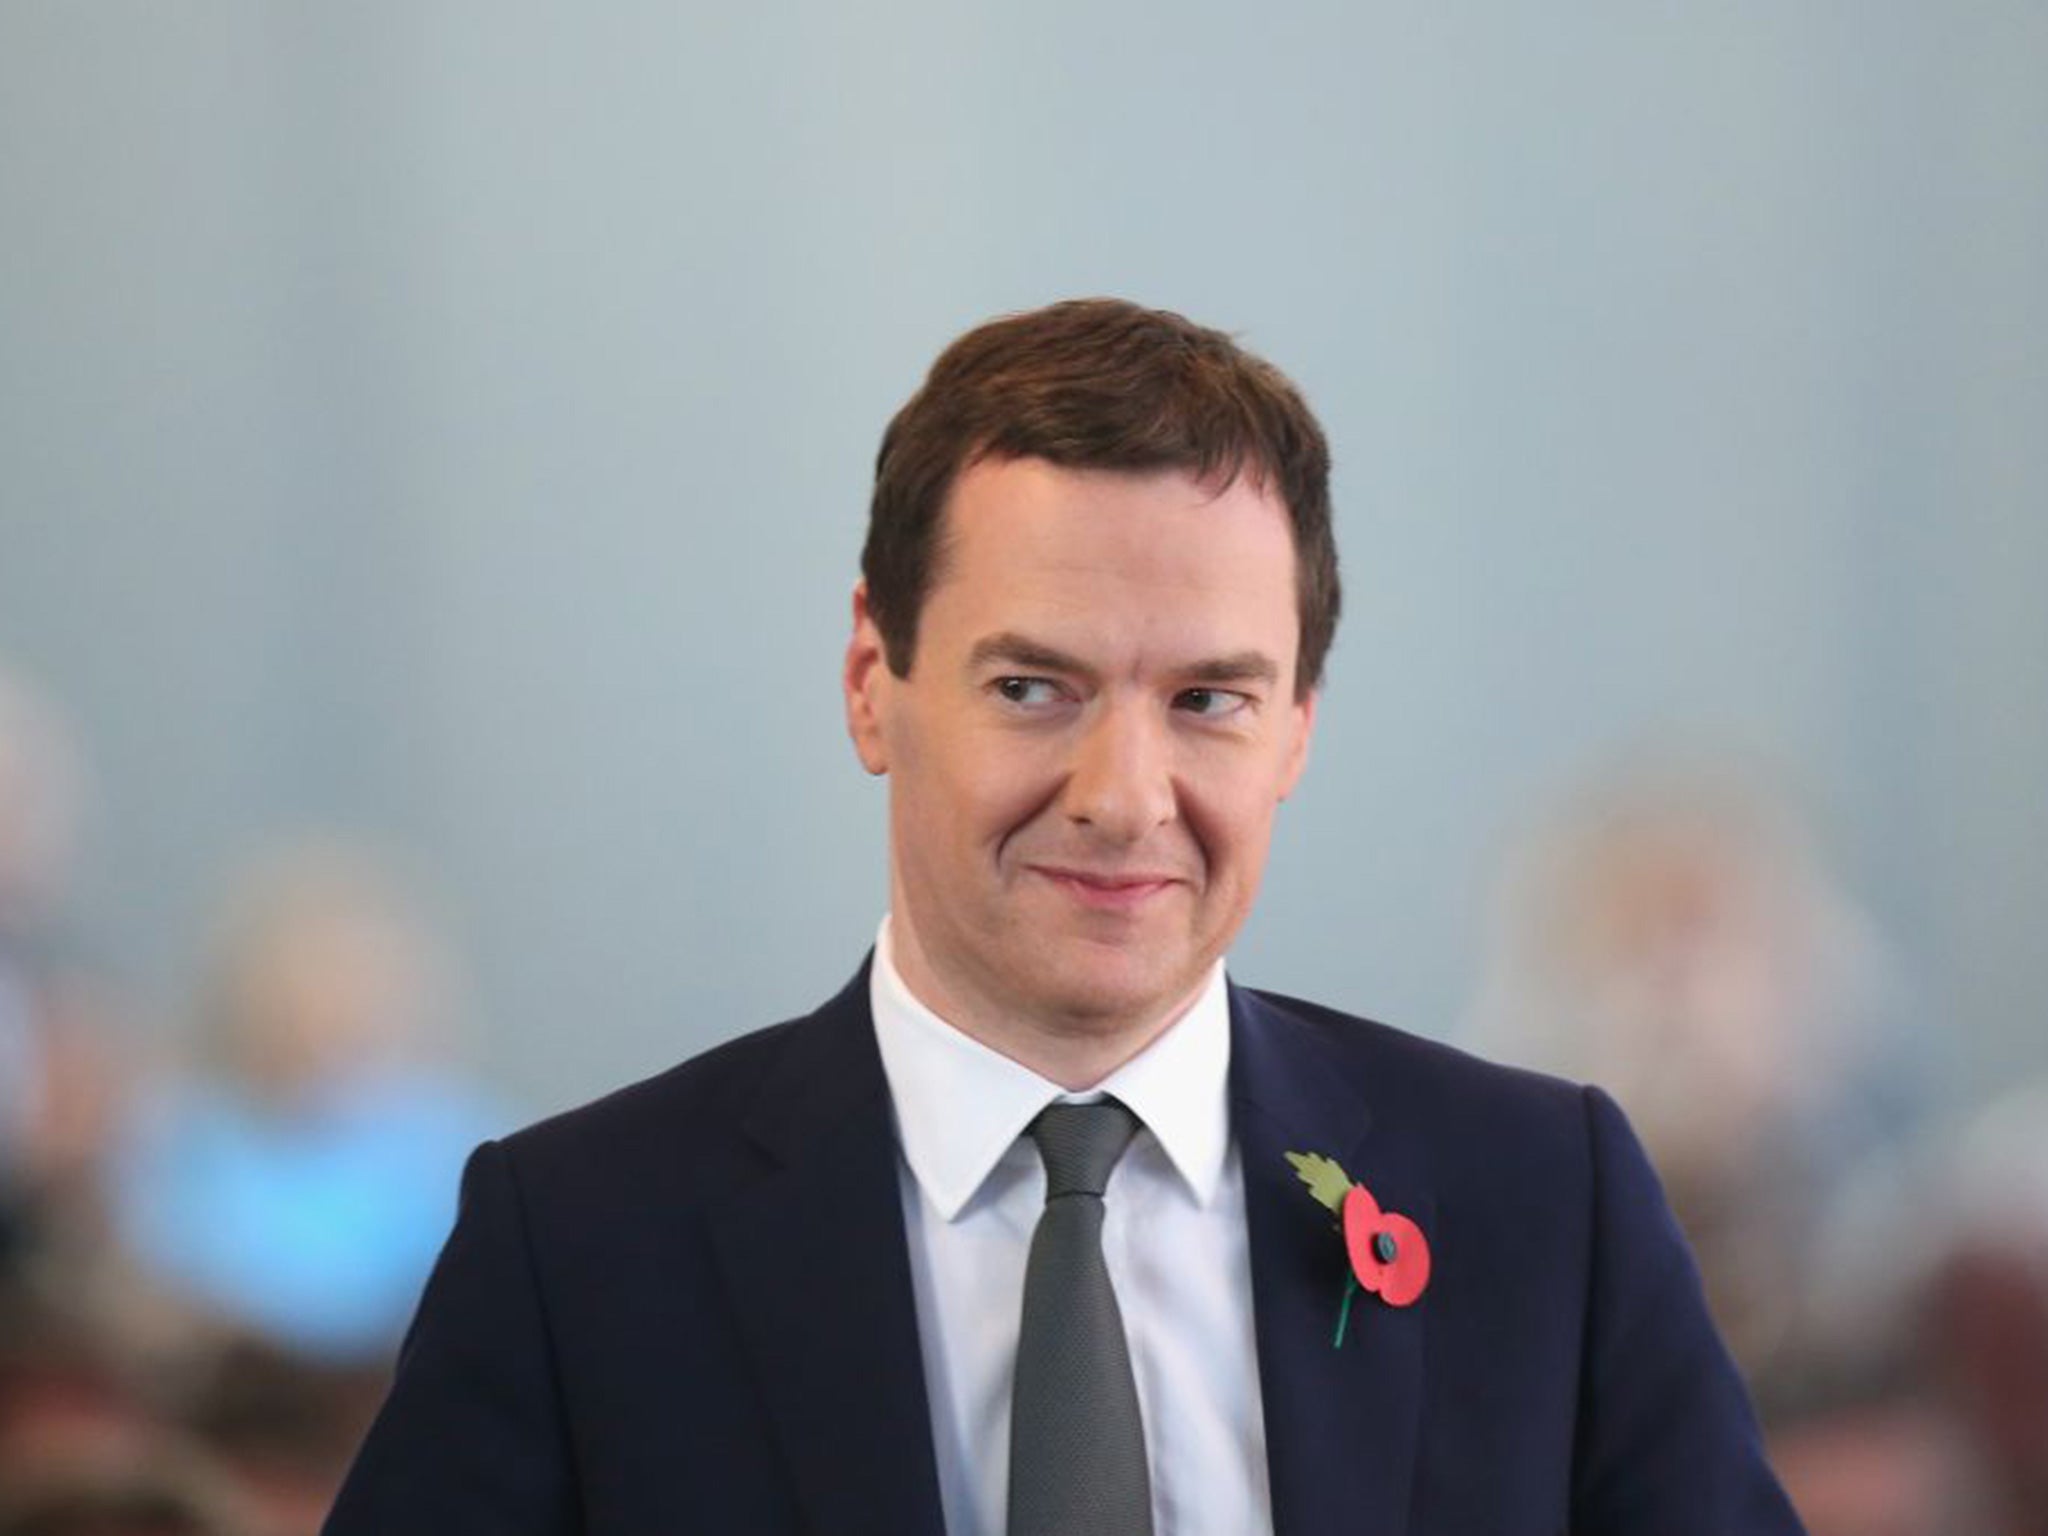 British Chancellor of the Exchequer George Osborne attends the "Day of German Industry" annual gathering